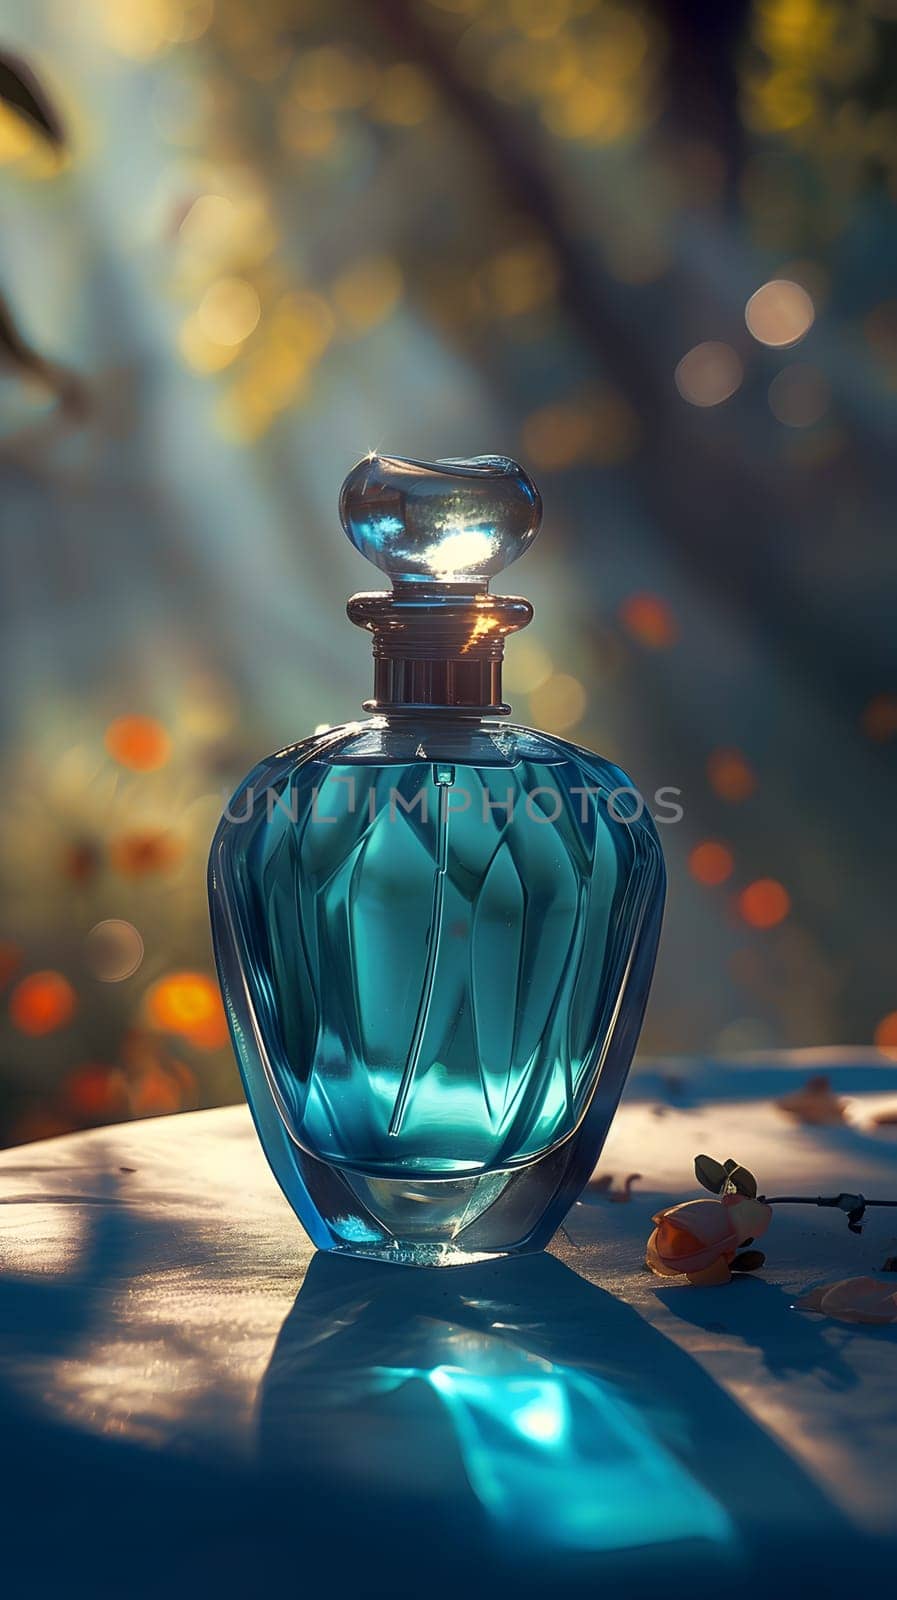 A glass bottle of blue perfume is elegantly displayed on a table, showcasing its enticing fragrance in a stylish manner